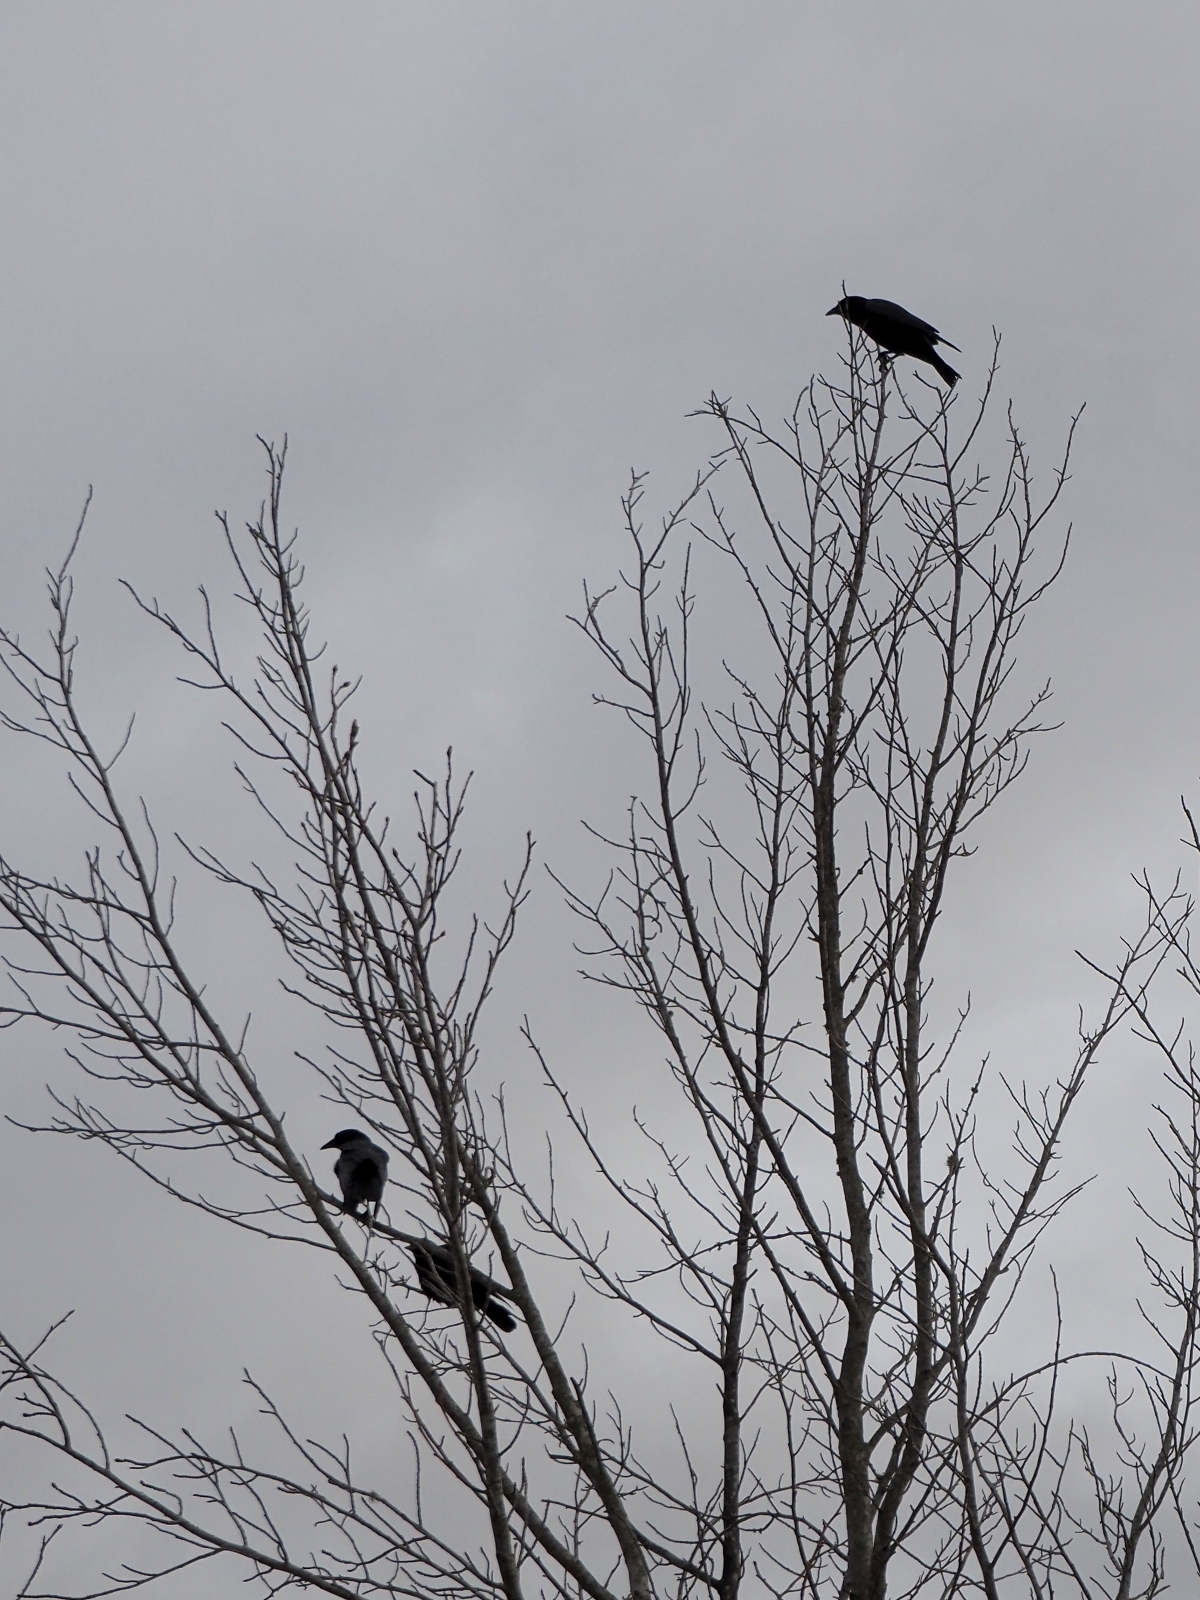 Three Crows in a tree